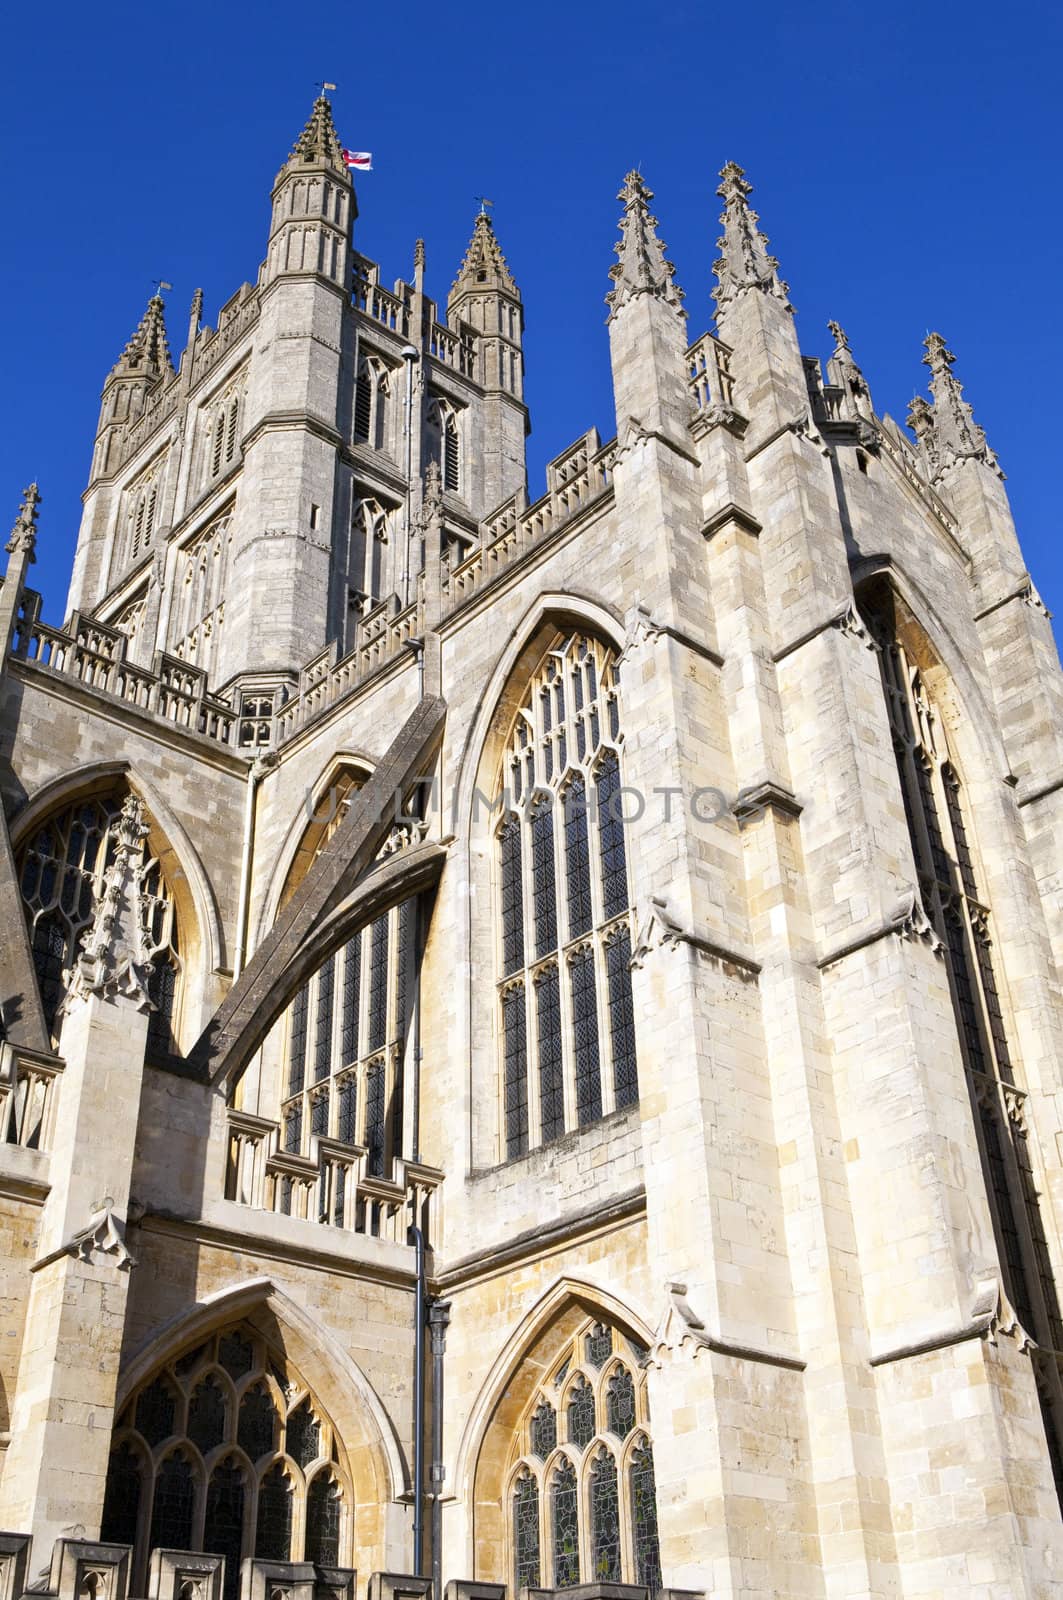 Bath Abbey (also known as Abbey Church of Saint Peter and Saint Paul) in Bath, Somerset.